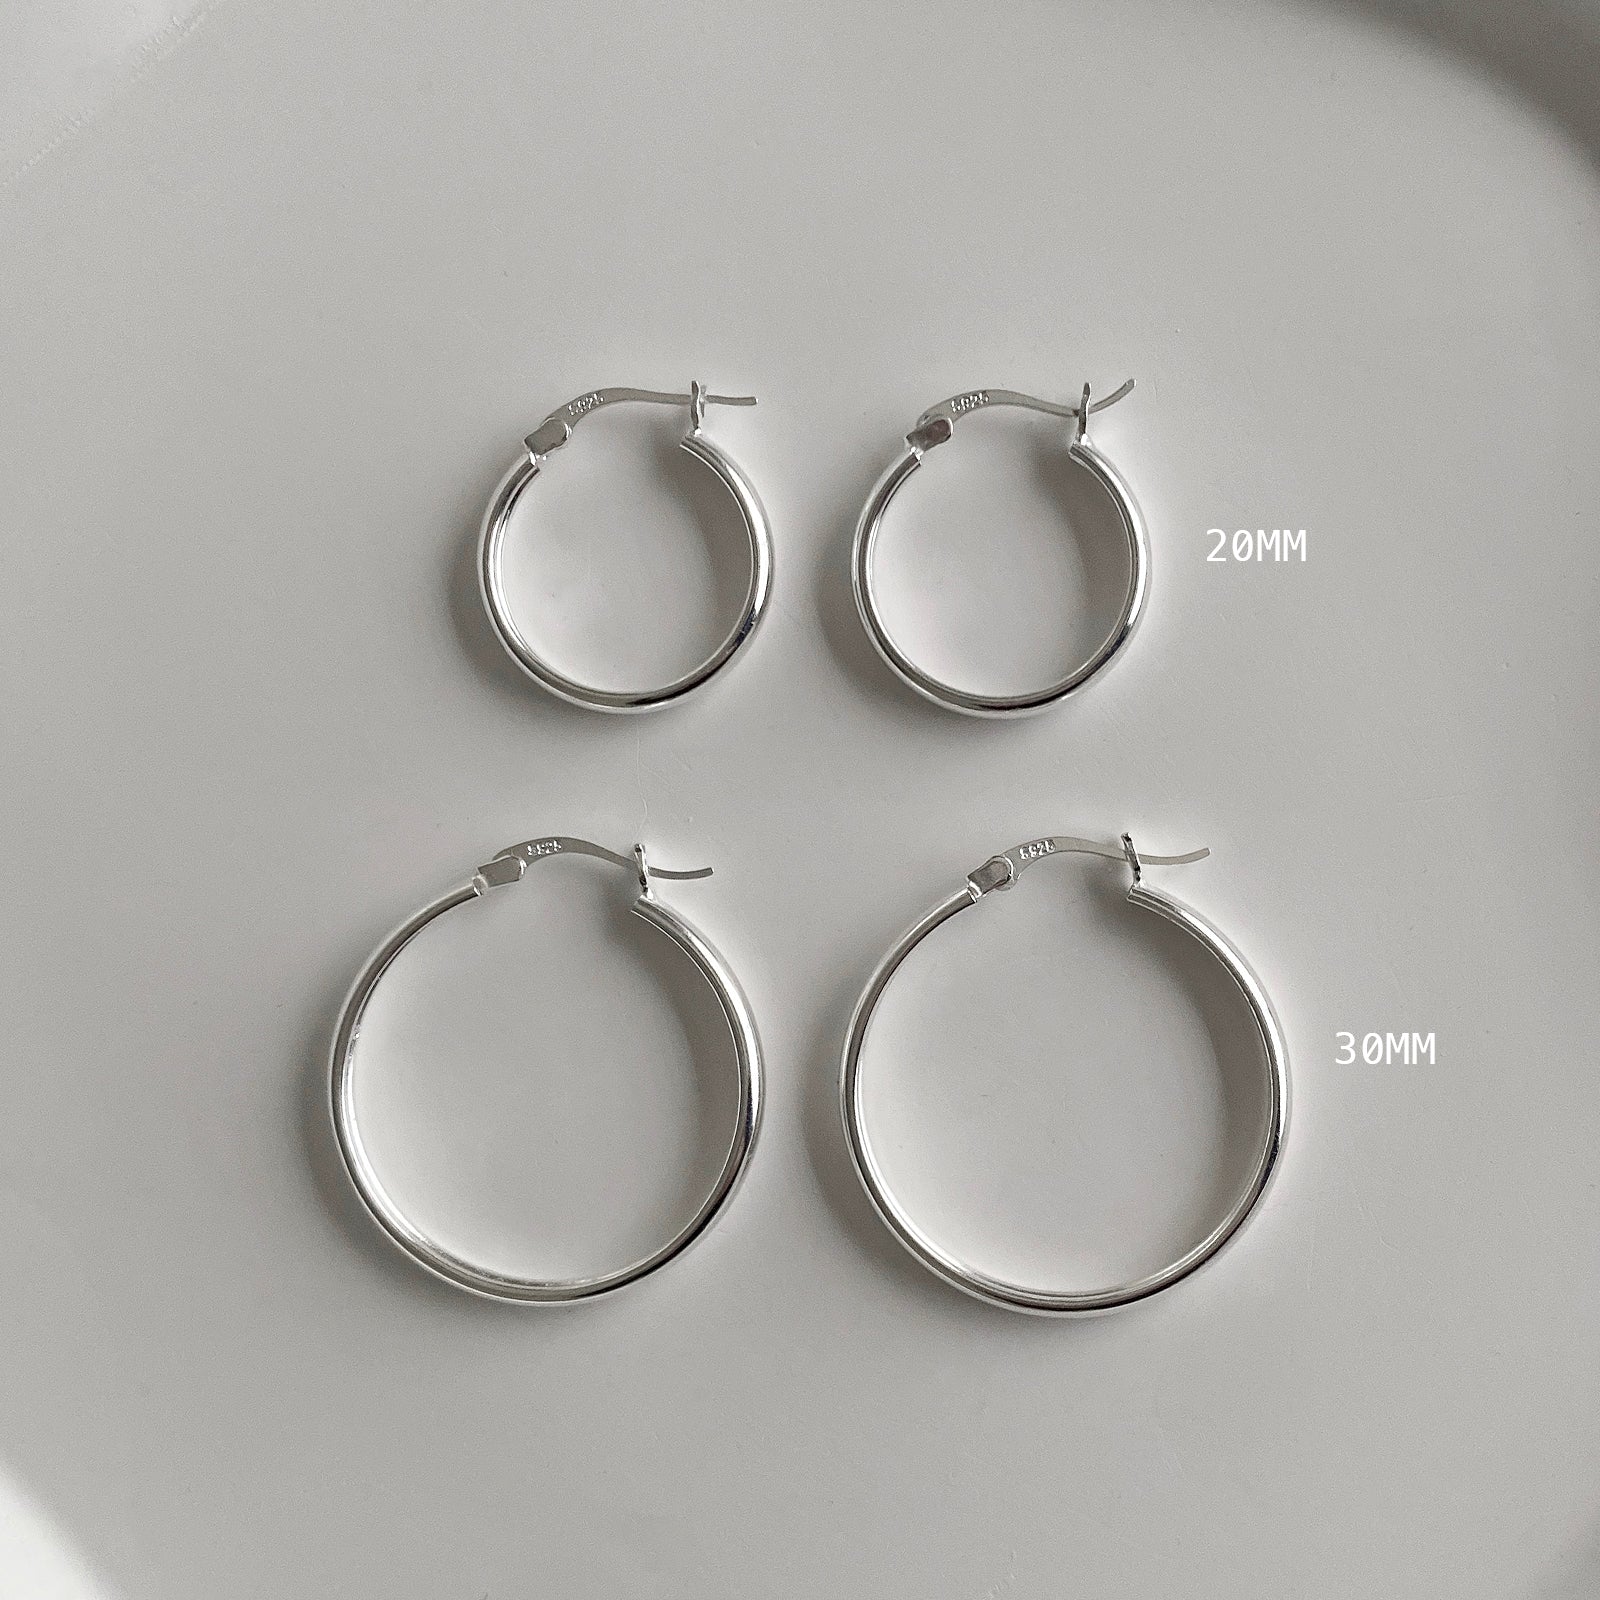 Jane Hoops are classic silver hoop earrings that come in 2 sizes:  20mm and 30mm diameters. 